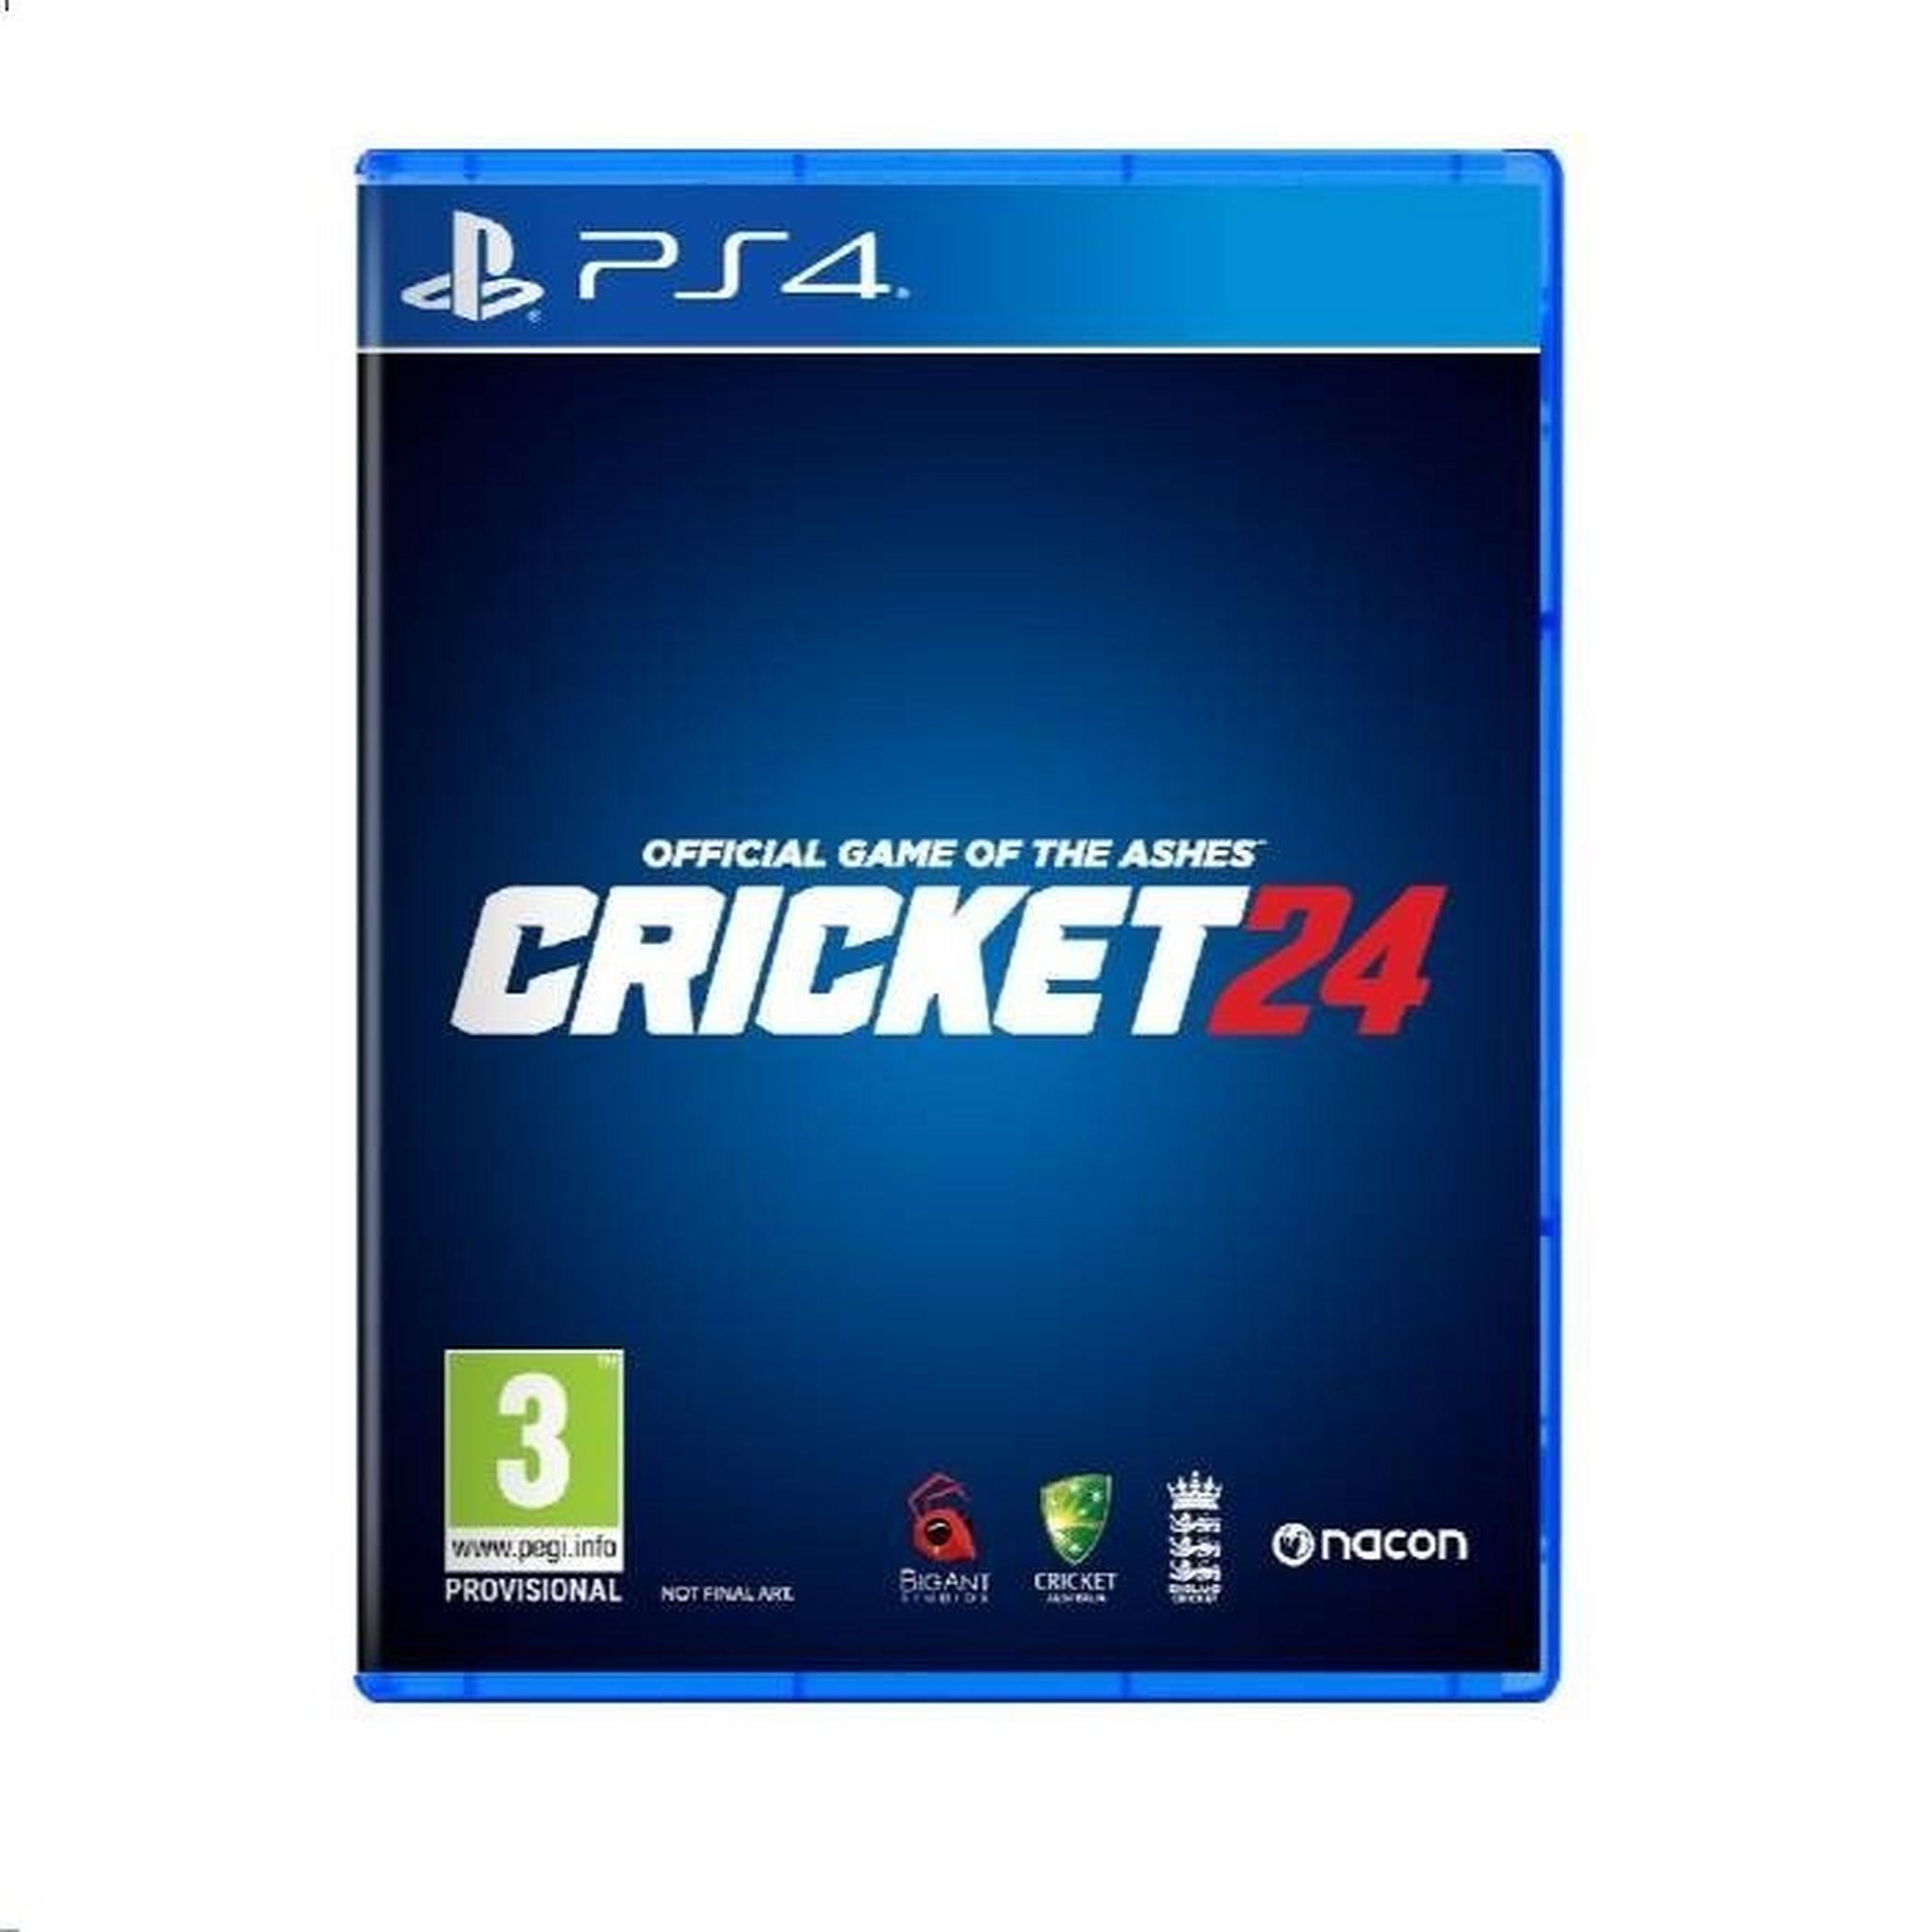 Sony Cricket 24 Official Game of The Ashes - PlayStation 4 Game, PS4-CRKT24